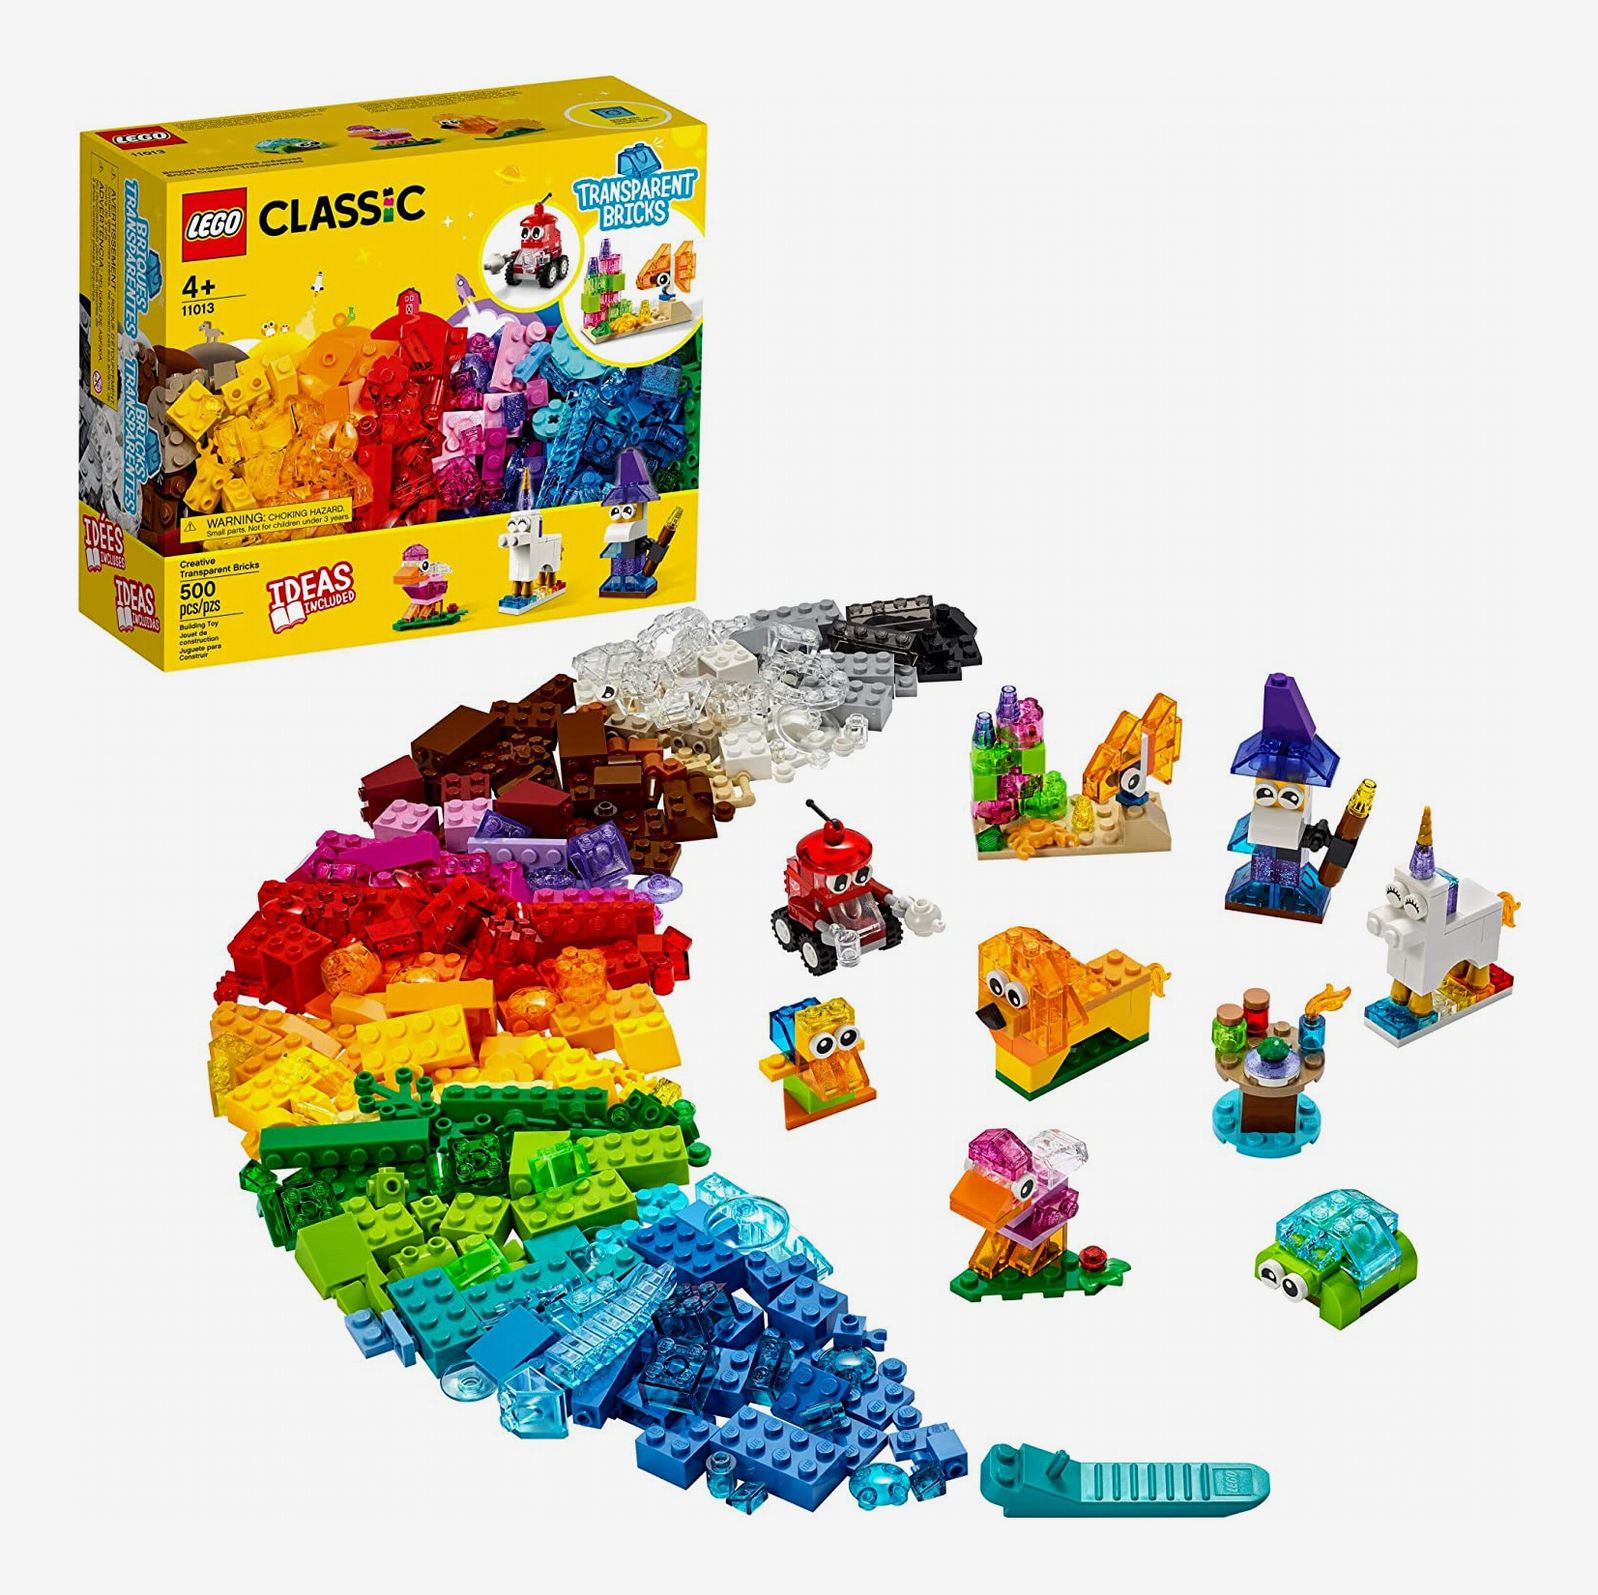 EZ-Toy Classic Construction Set Building Toy 3 in 1 Creativity Speed Time 